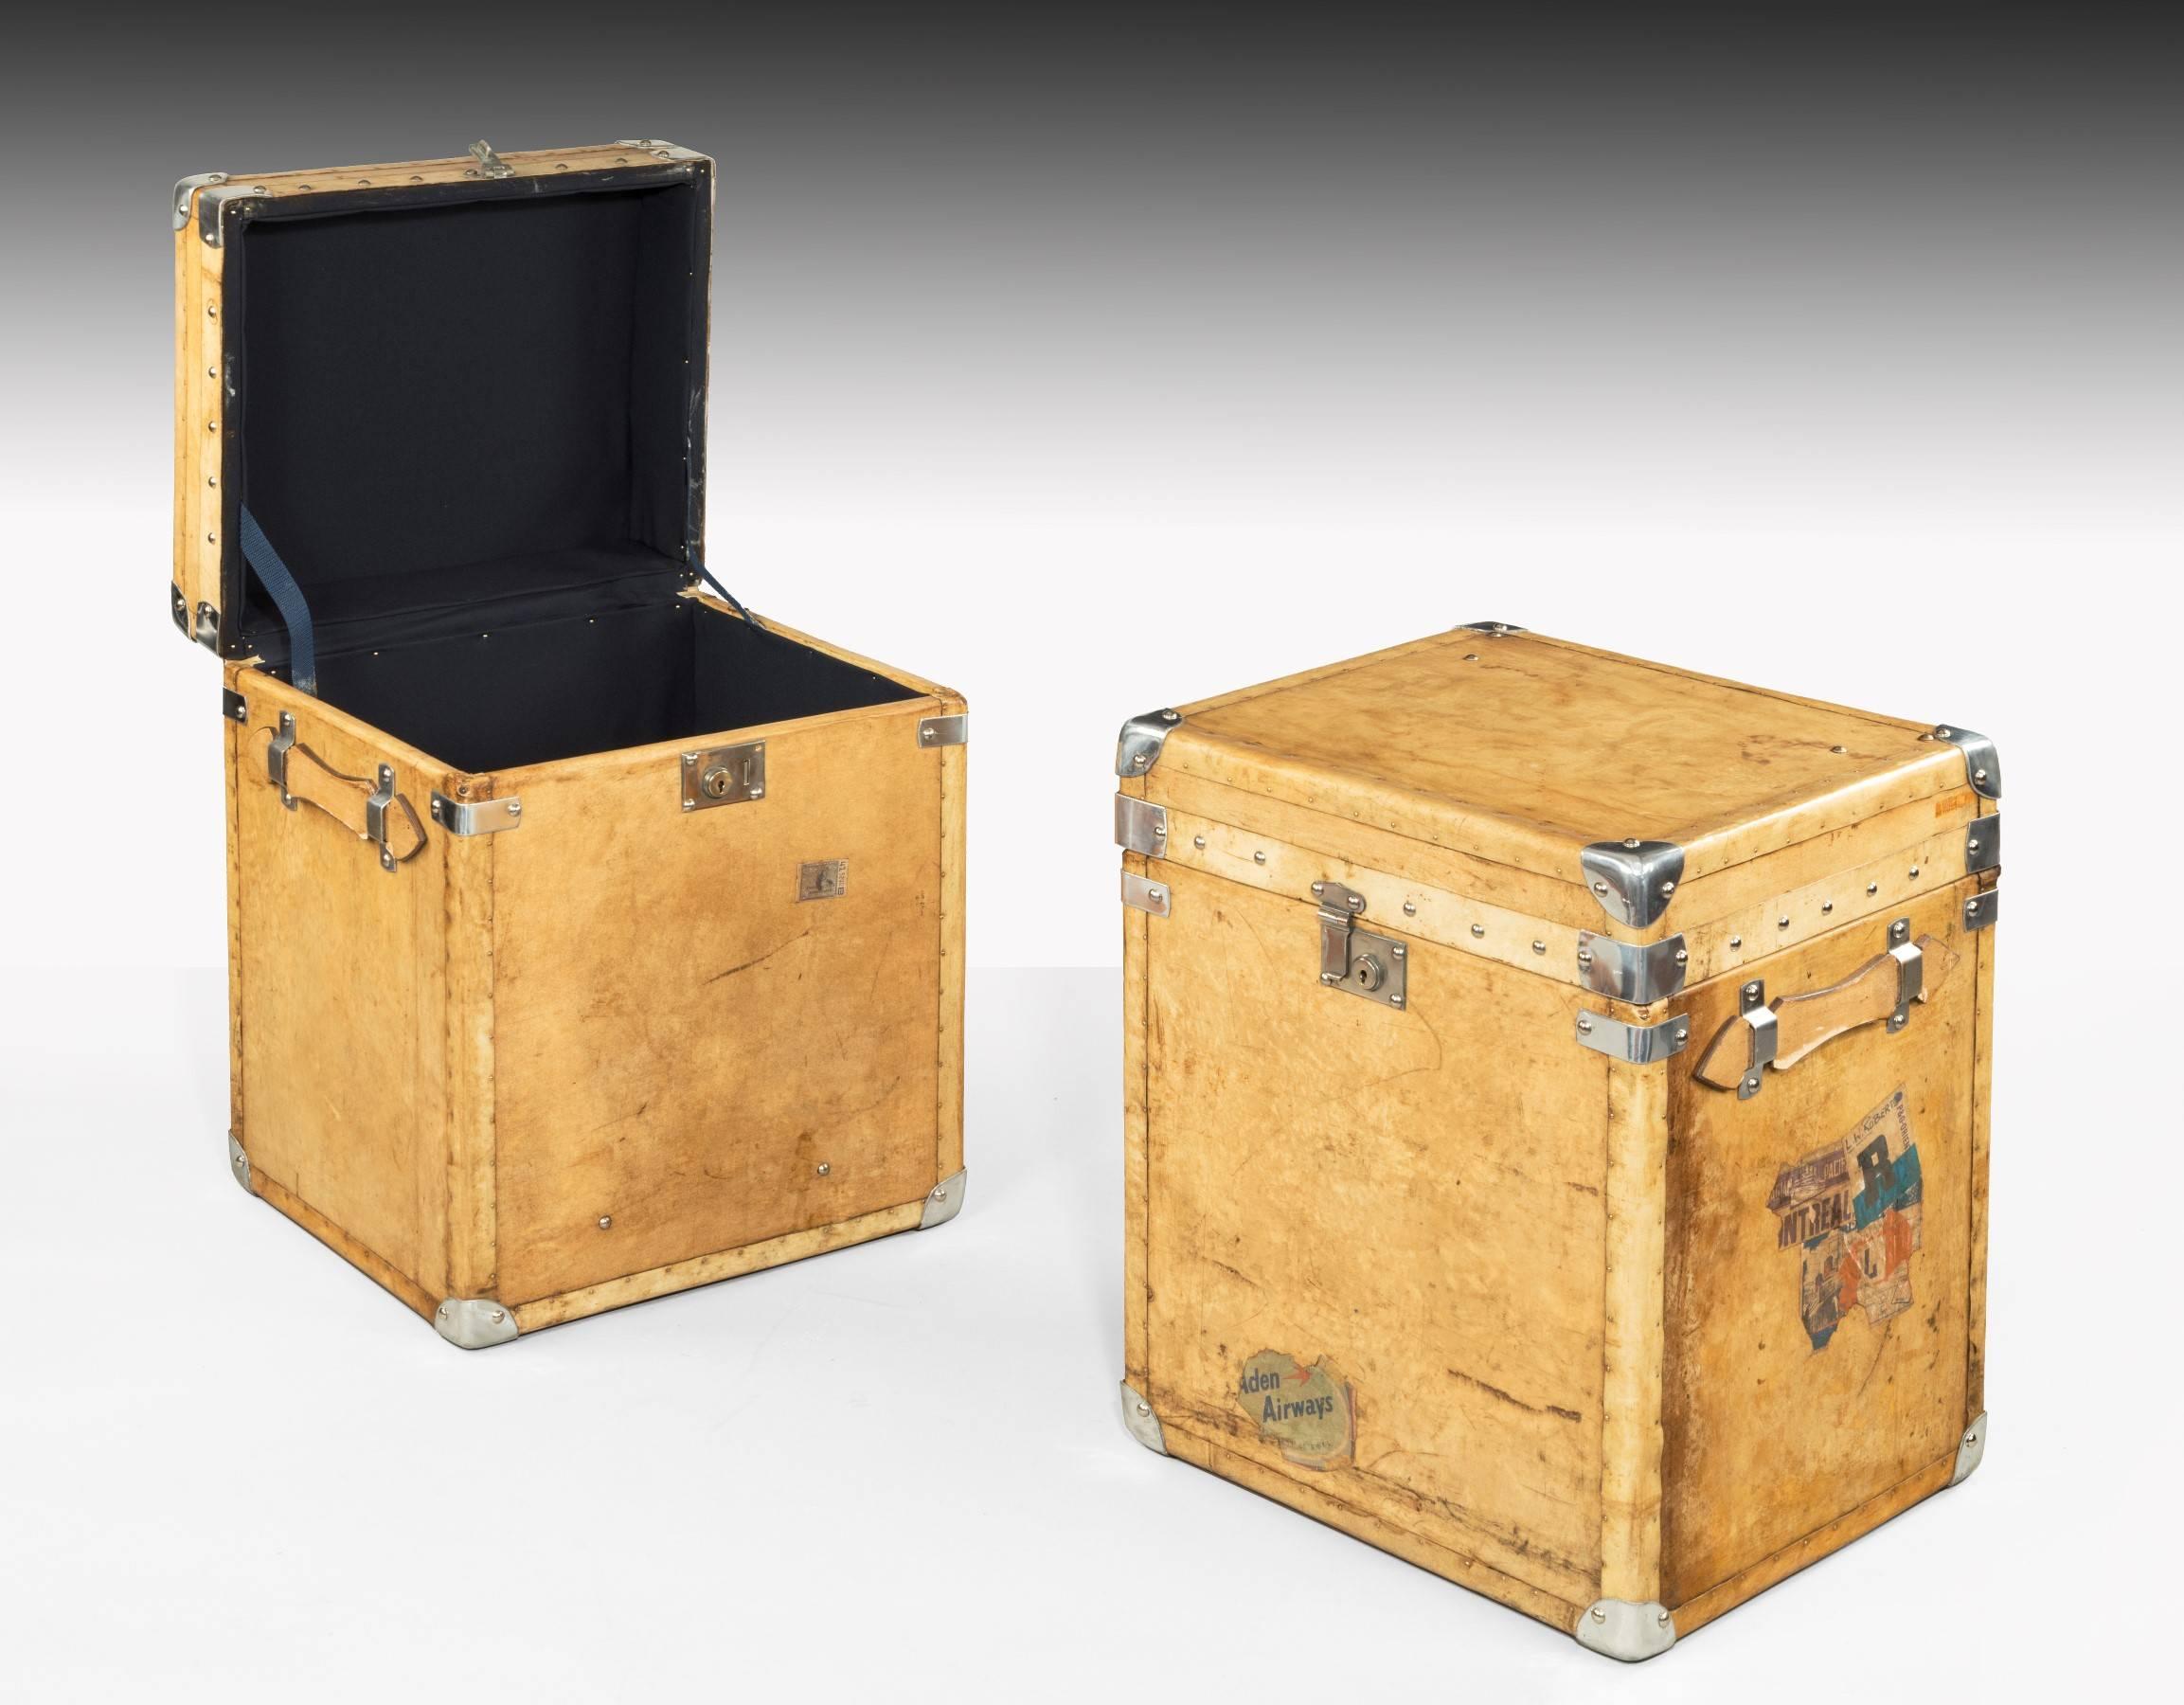 With good style, this pair of vintage luggage boxes are ideal in size and design to act as a pair of unusual end tables. The velum surface has good patination. They are currently in our Hungerford location.